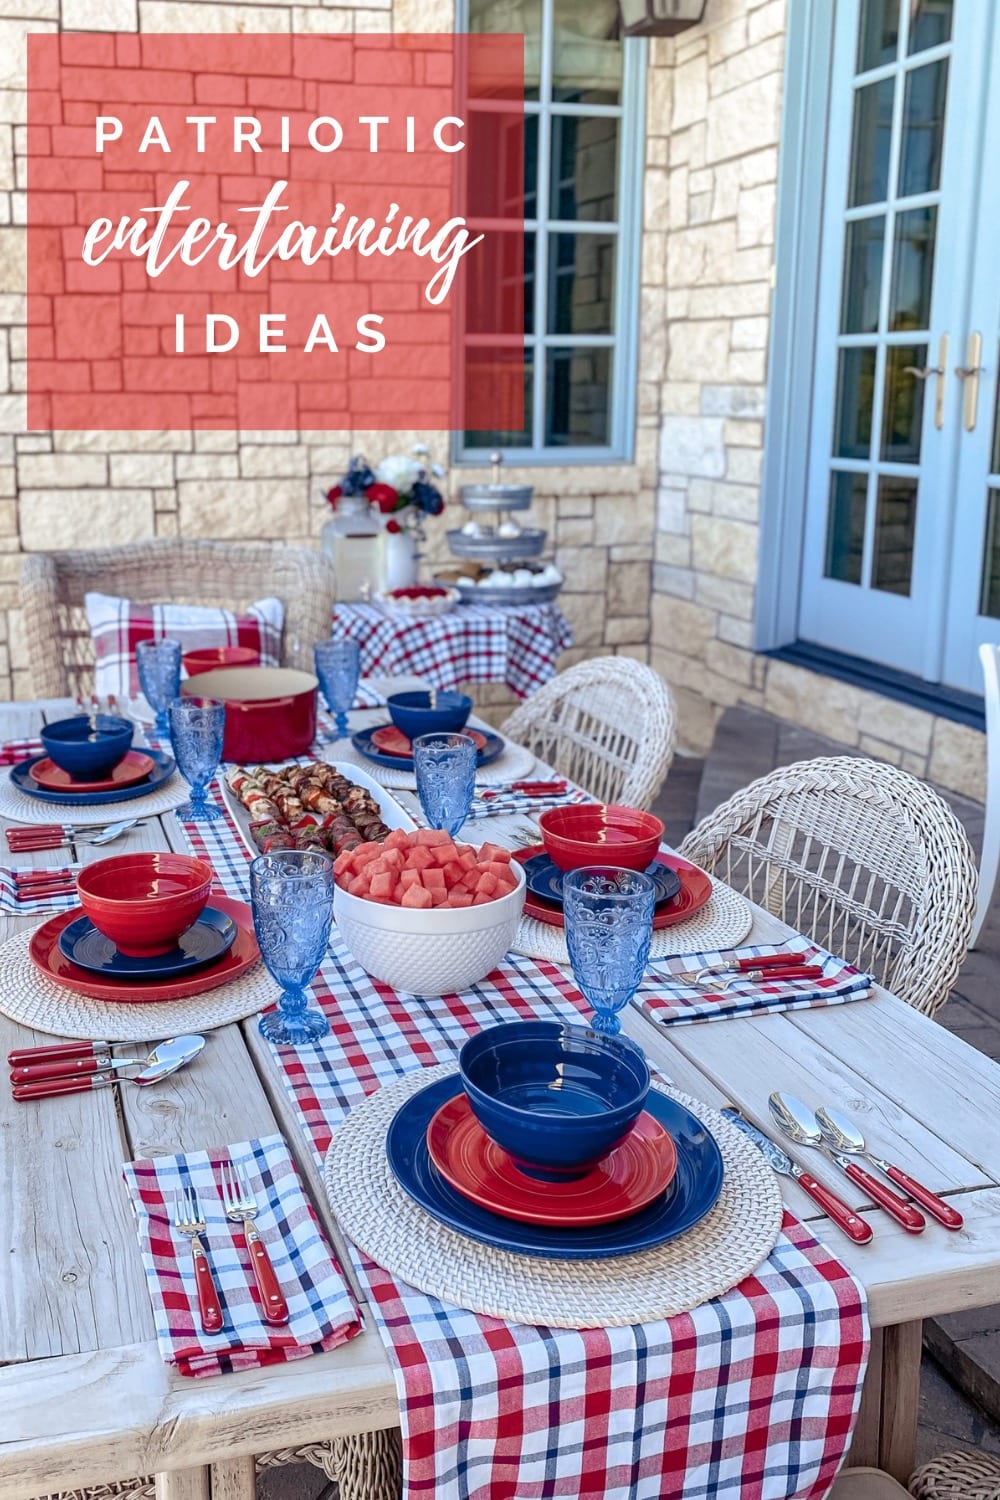 Check out these Patriotic Entertaining Ideas for your next Fourth of July or Memorial Day celebration with tablescapes, recipes, and more!